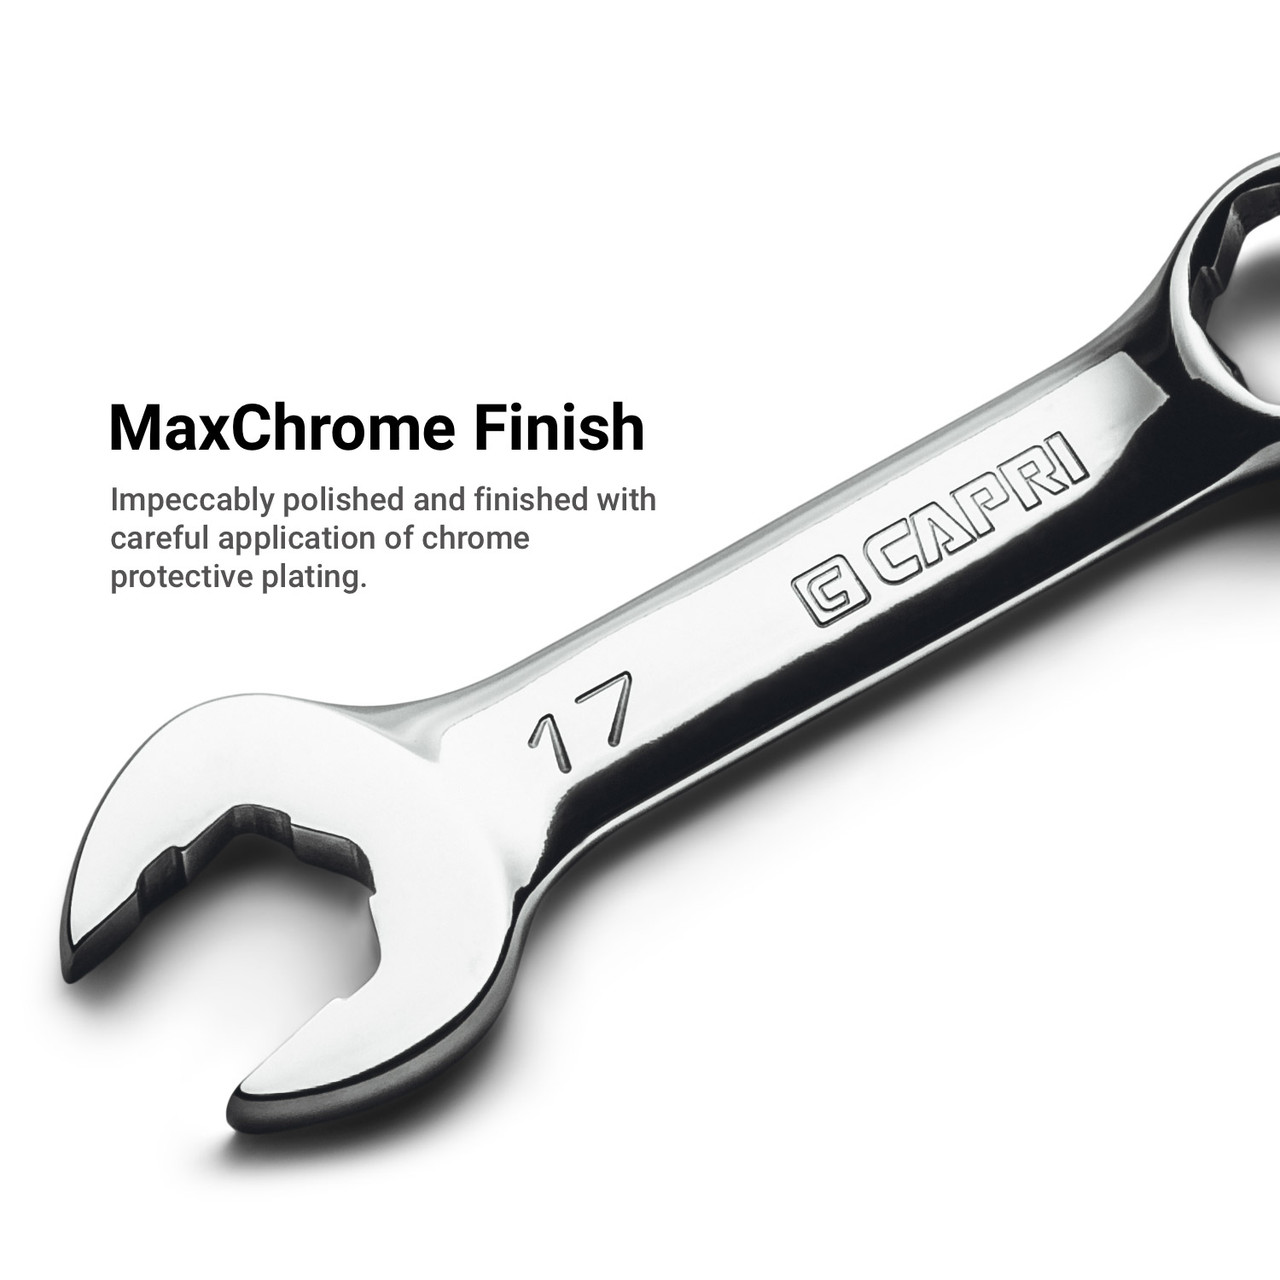 Capri Tools 3/4 in. WaveDrive Pro Stubby Combination Wrench for Regular and Rounded Bolts